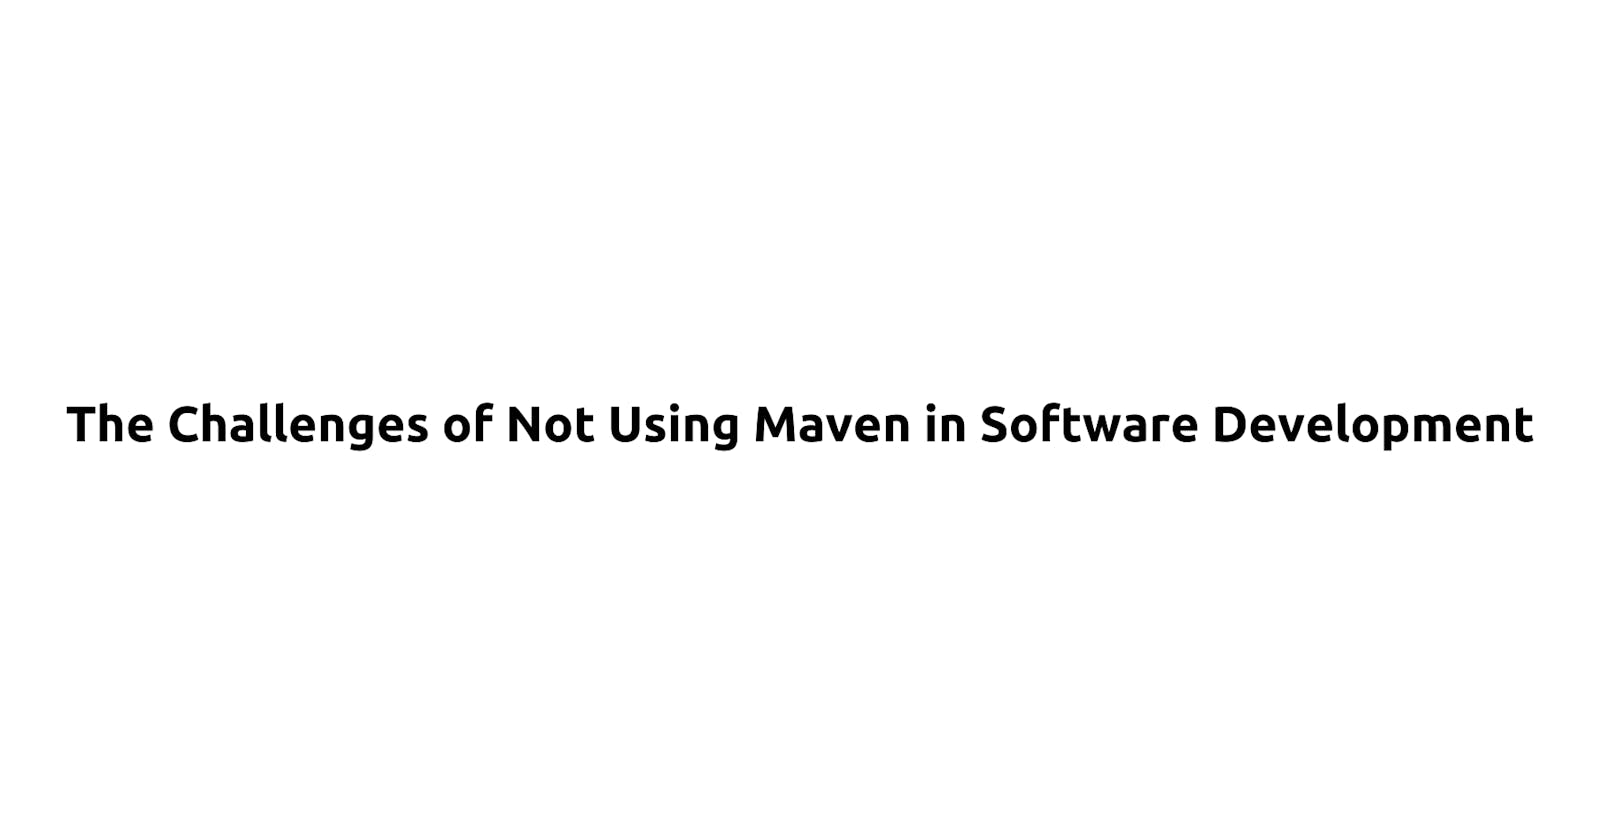 The Challenges of Not Using Maven in Software Development